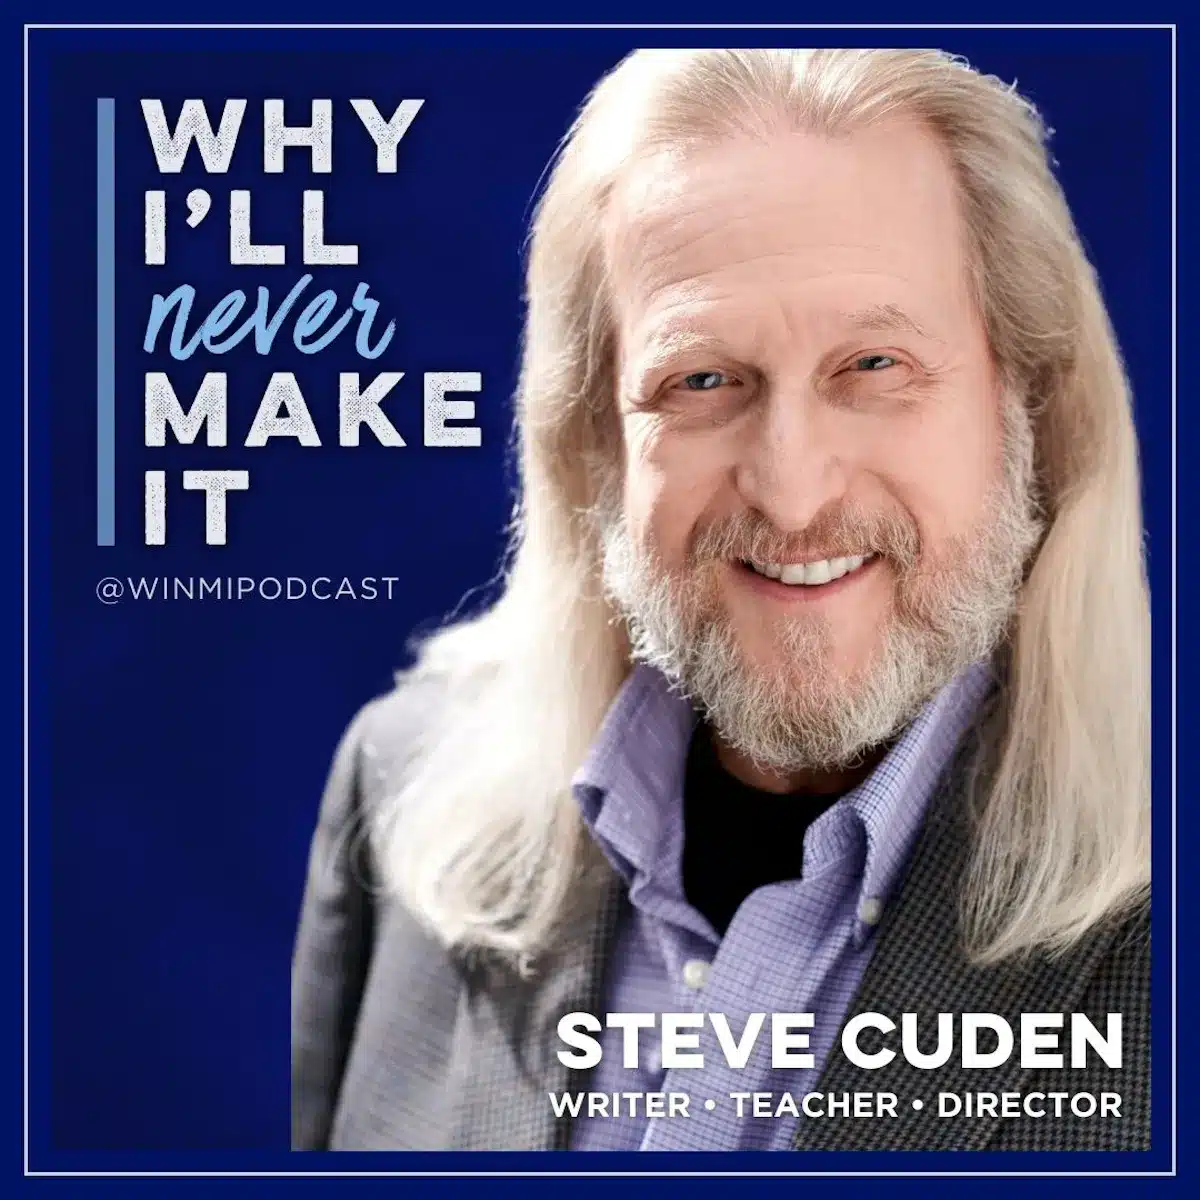 Why I‘ll Never Make It Steve Cuden (Part 2) Discovers His Talent for Animation Writing & The Art of StoryBeats